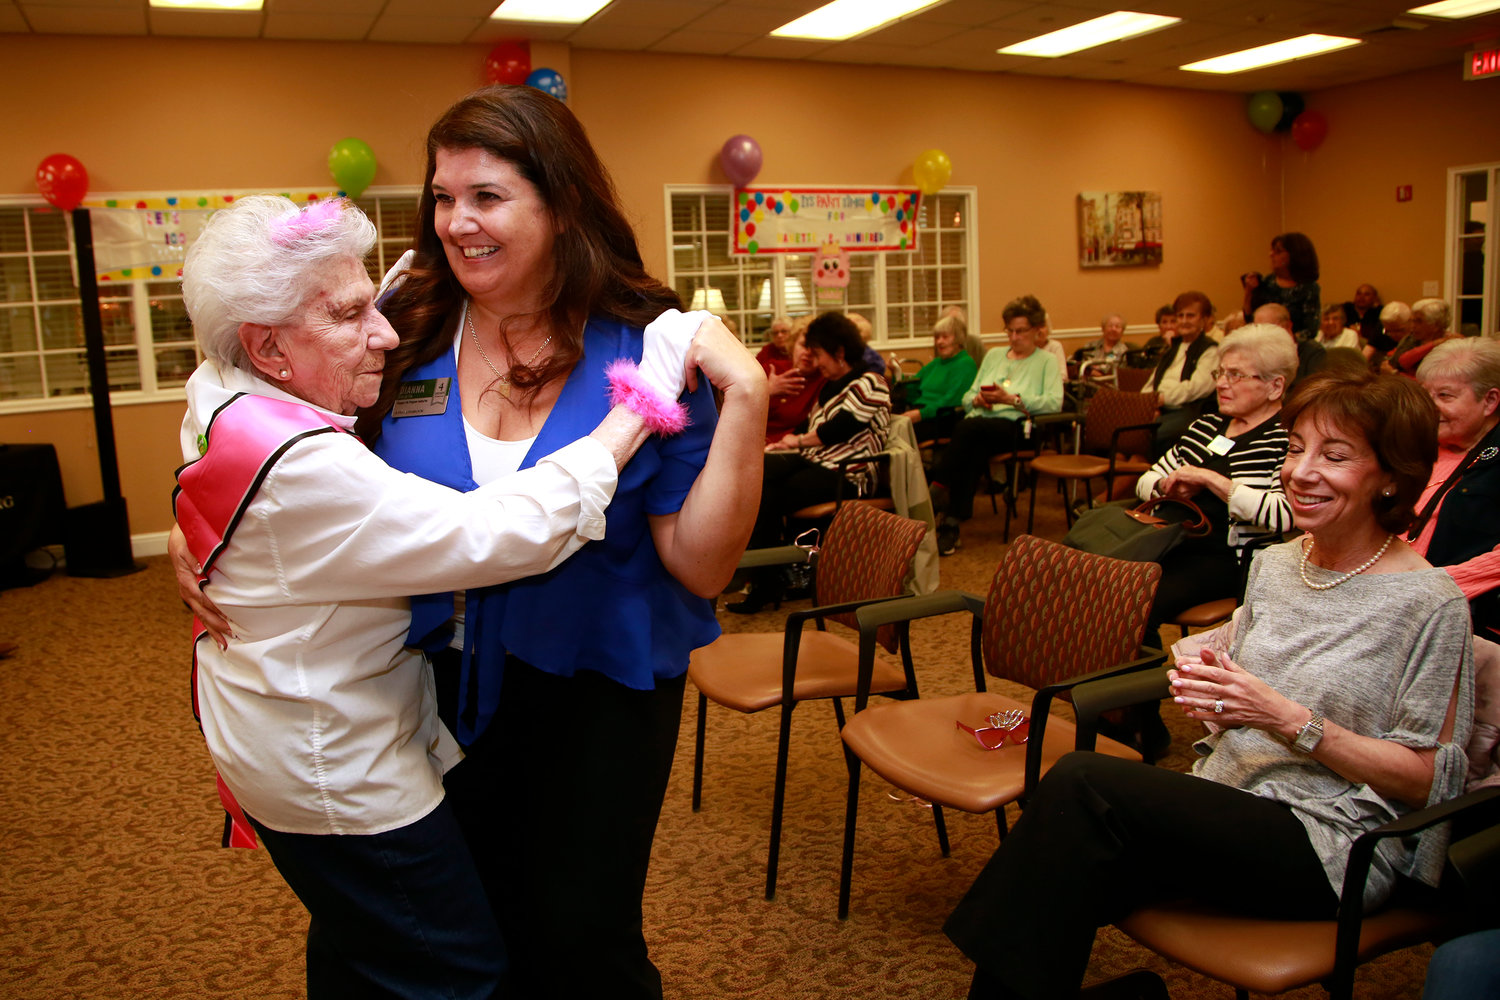 A Centenarian Celebration for the ages at Atria of Lynbrook | Herald ...